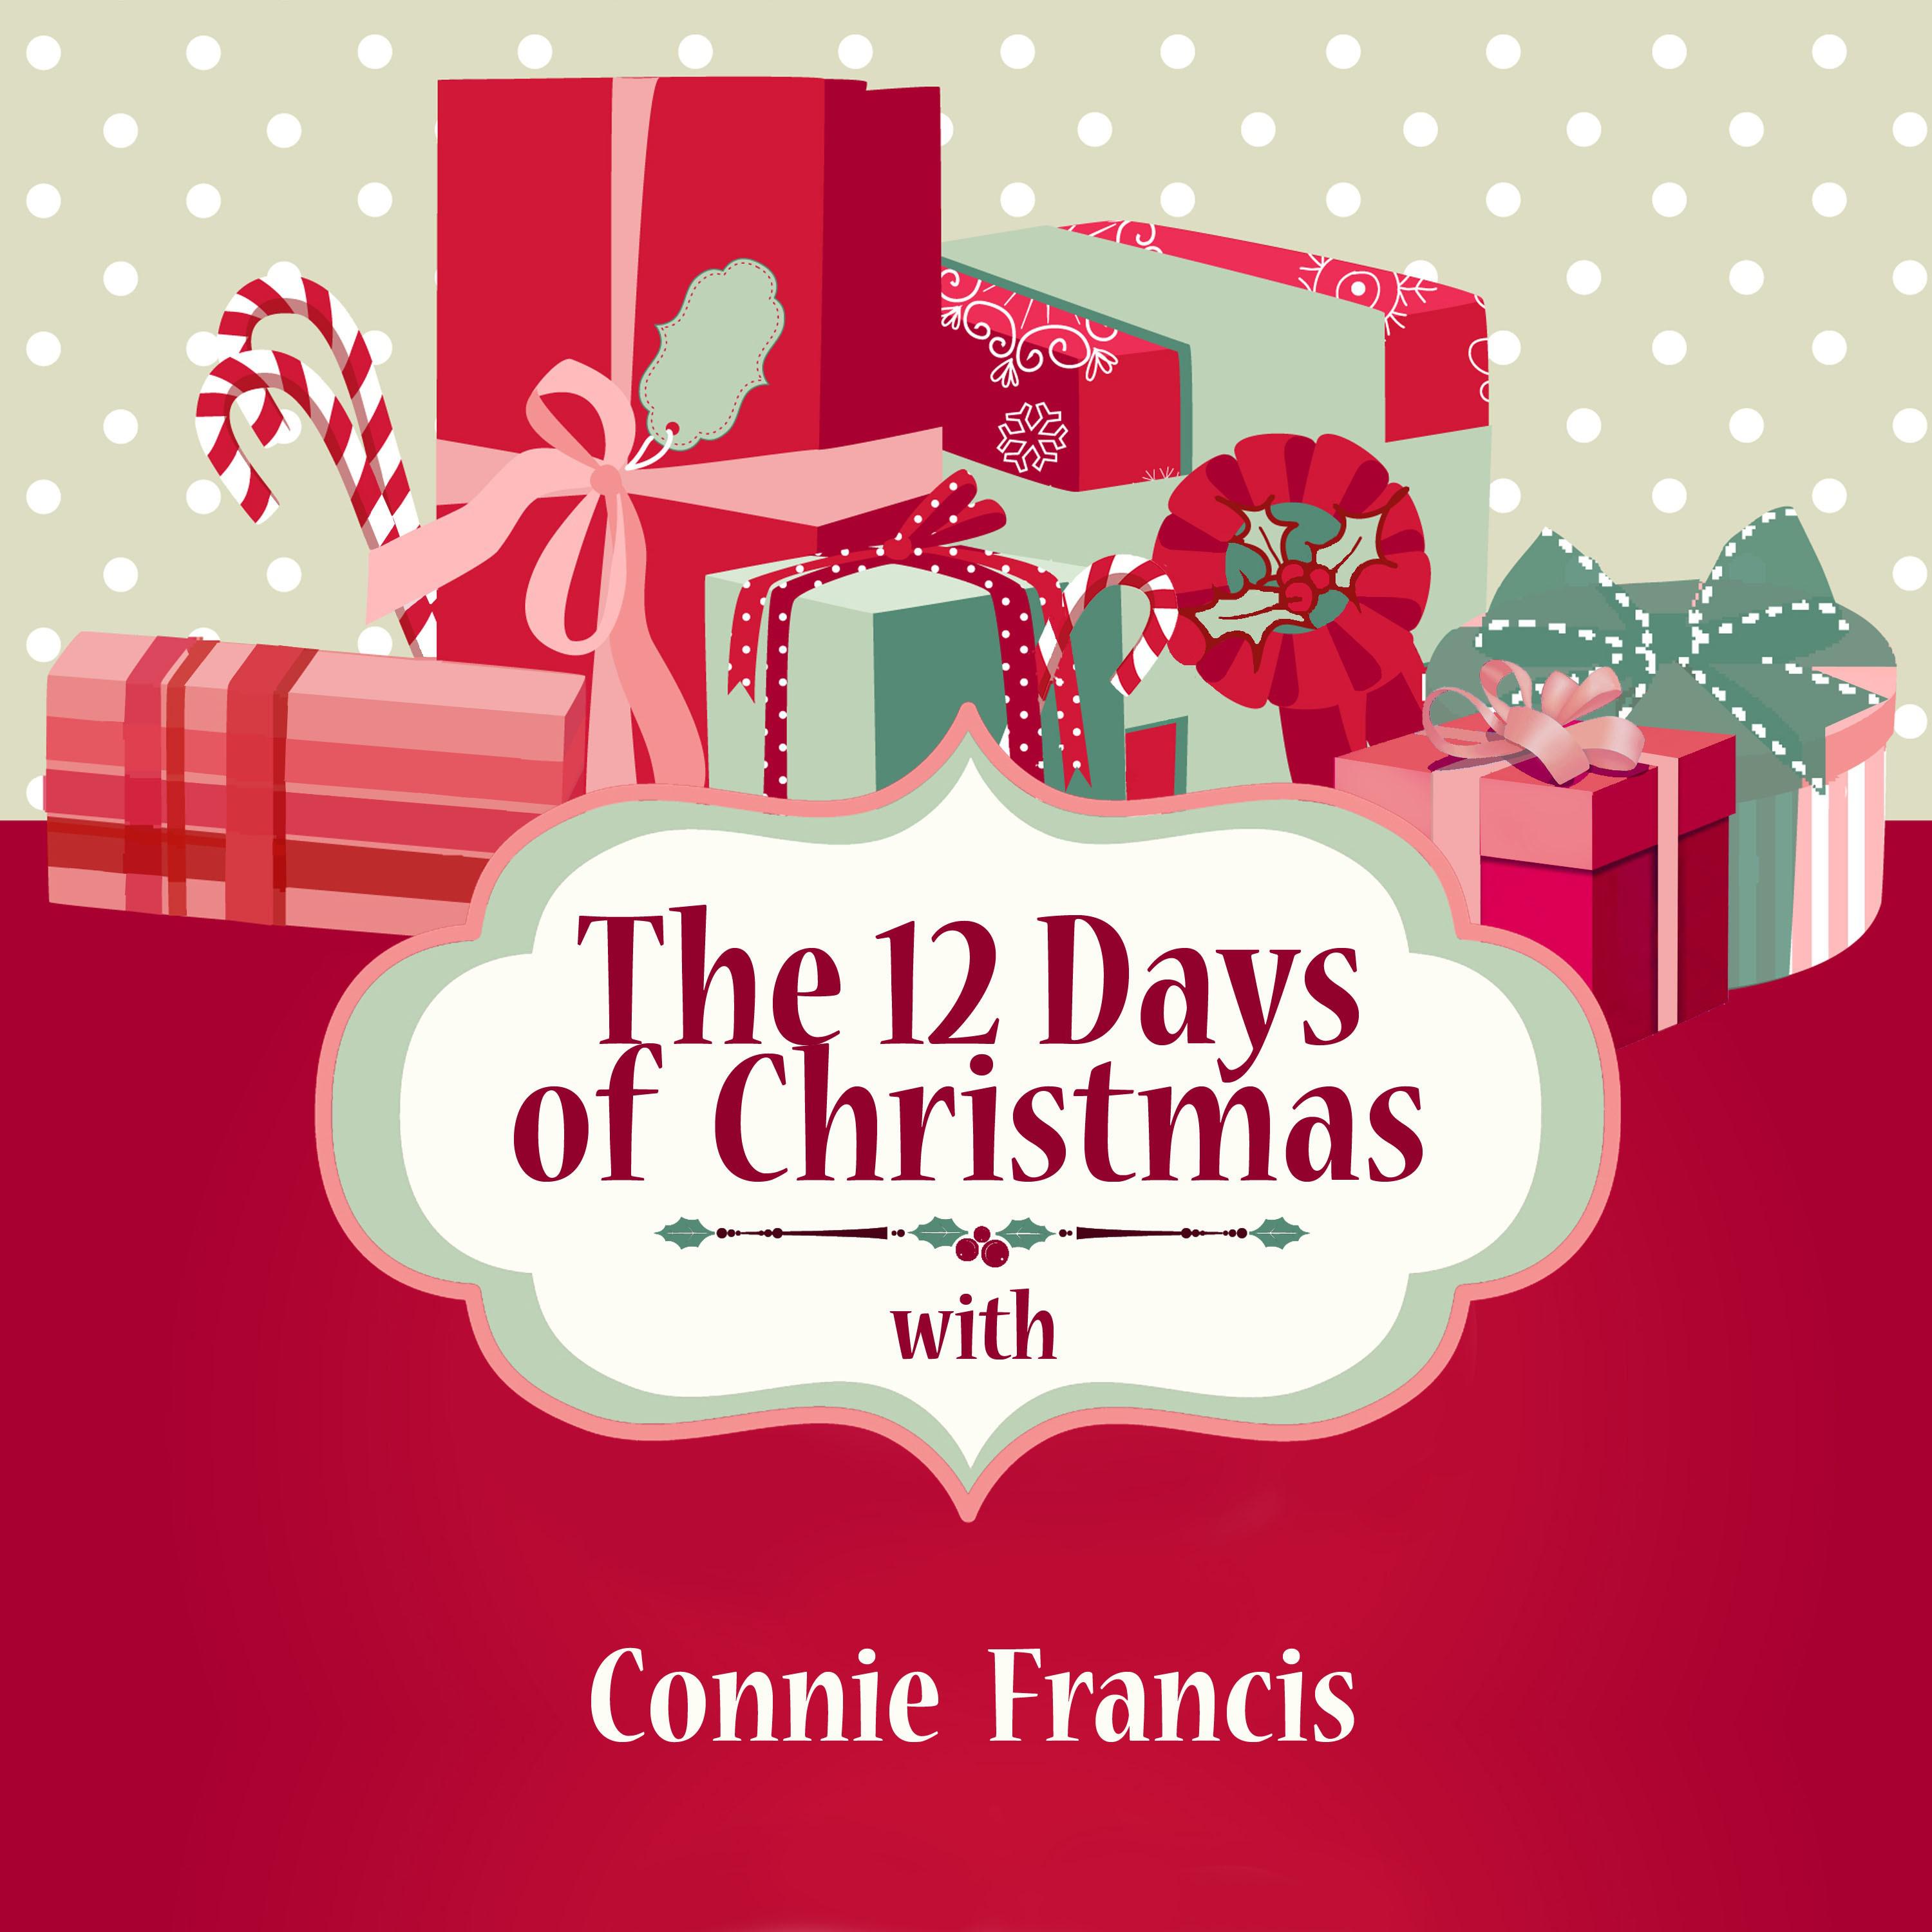 The 12 Days of Christmas with Connie Francis